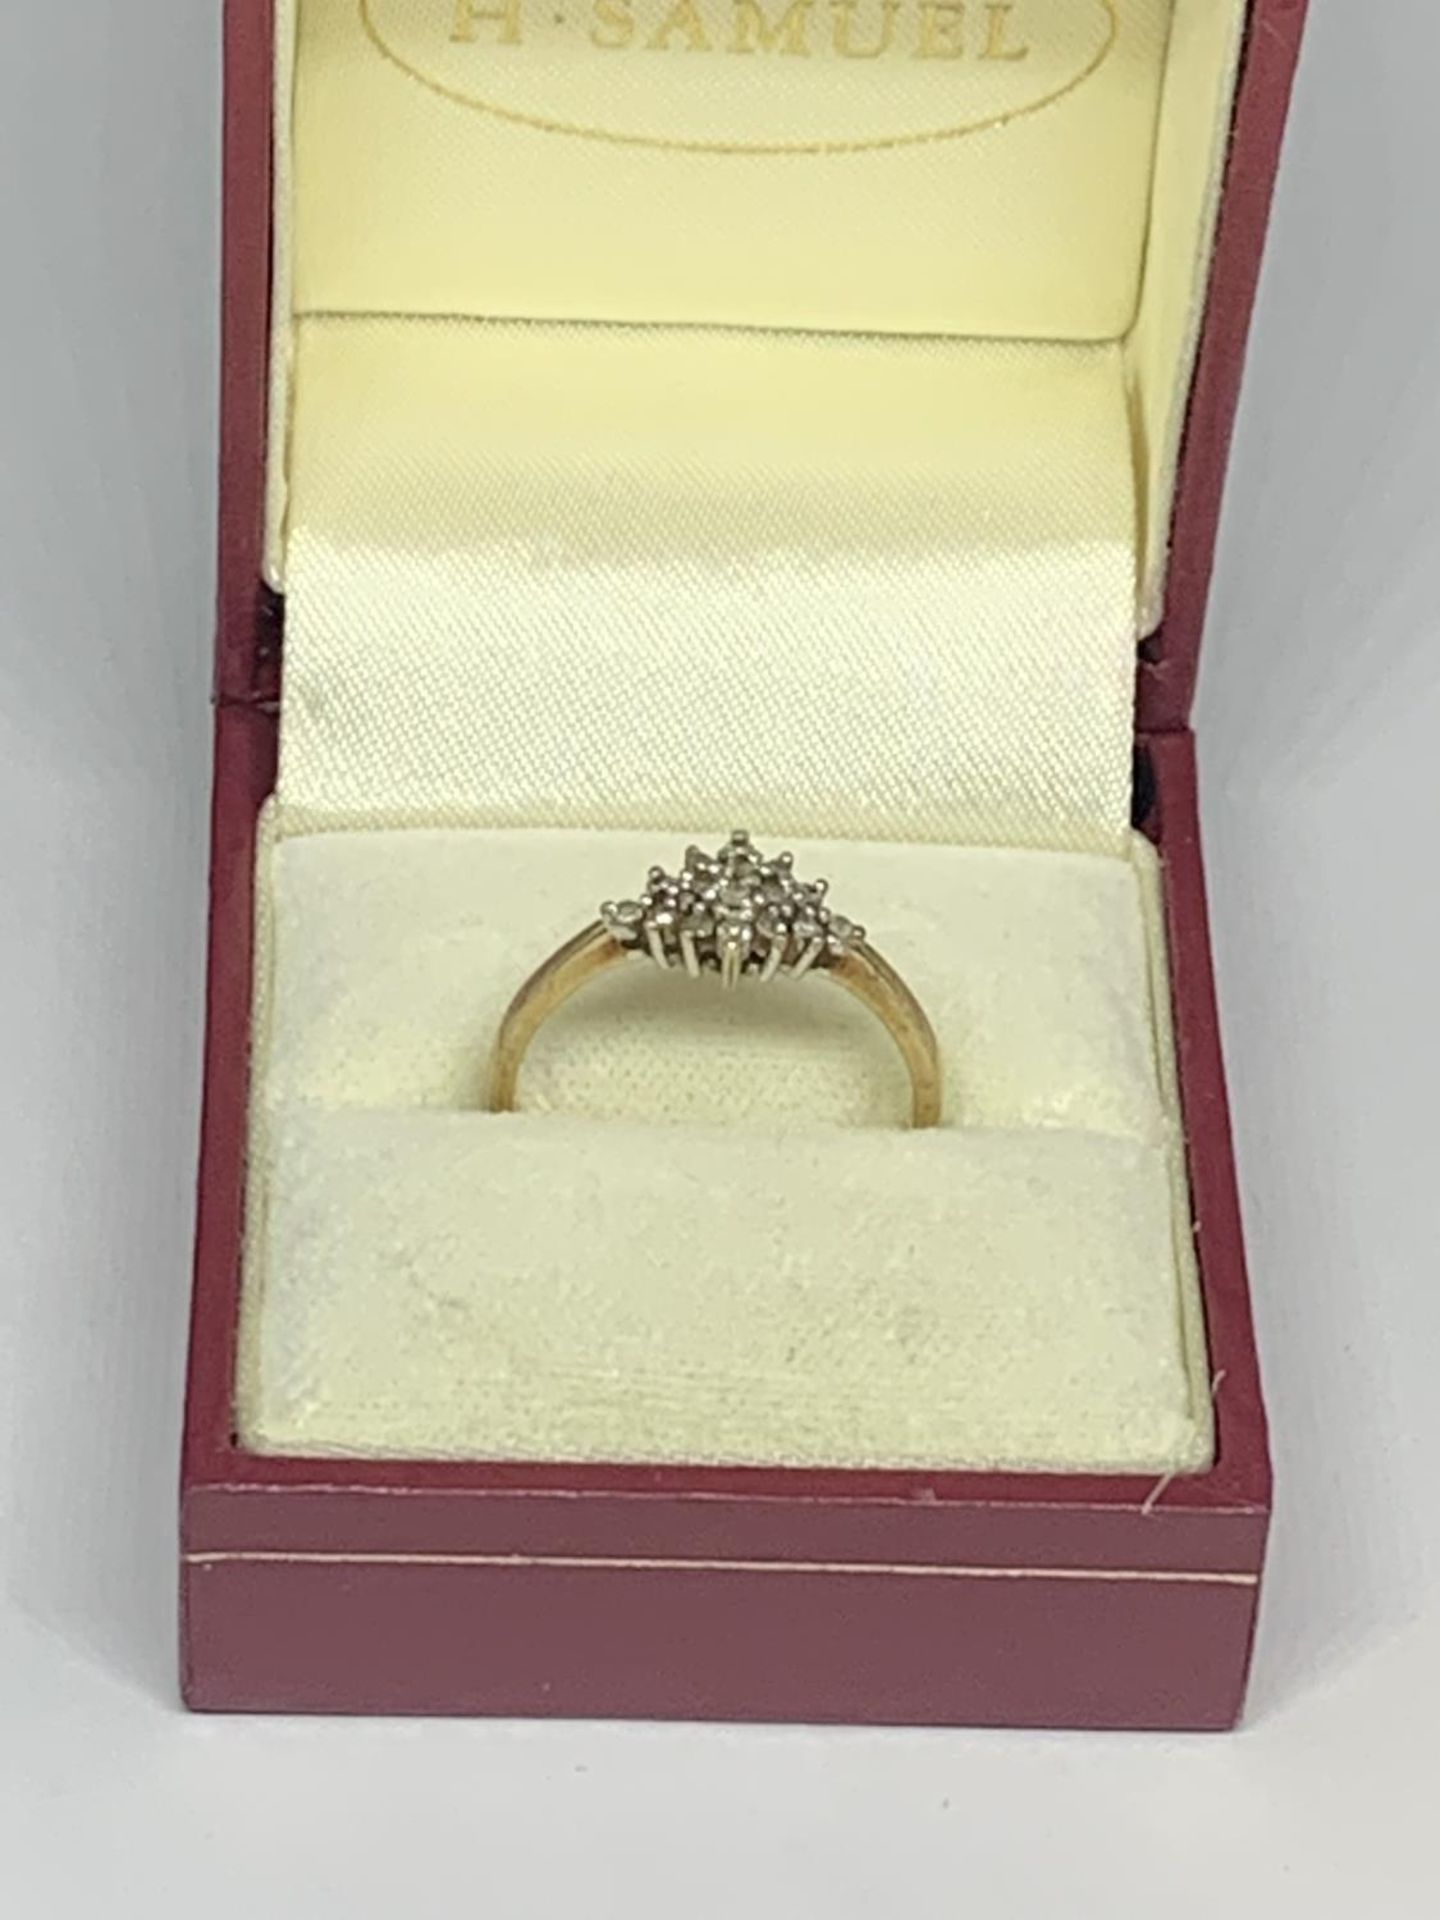 A 9 CARAT GOLD RING WITH DIAMONDS IN A DIAMOND SHAPE DESIGN SIZE 0 WITH PRESENTATION BOX - Image 5 of 5